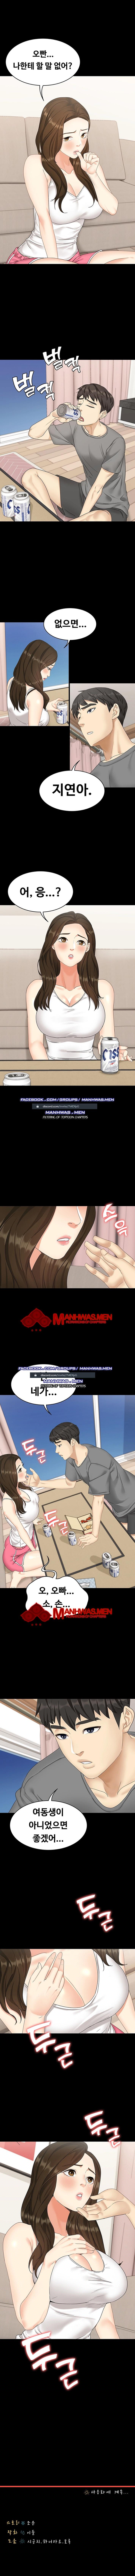 She’s My Younger Sister, But it’s Okay Raw - Chapter 1 Page 9